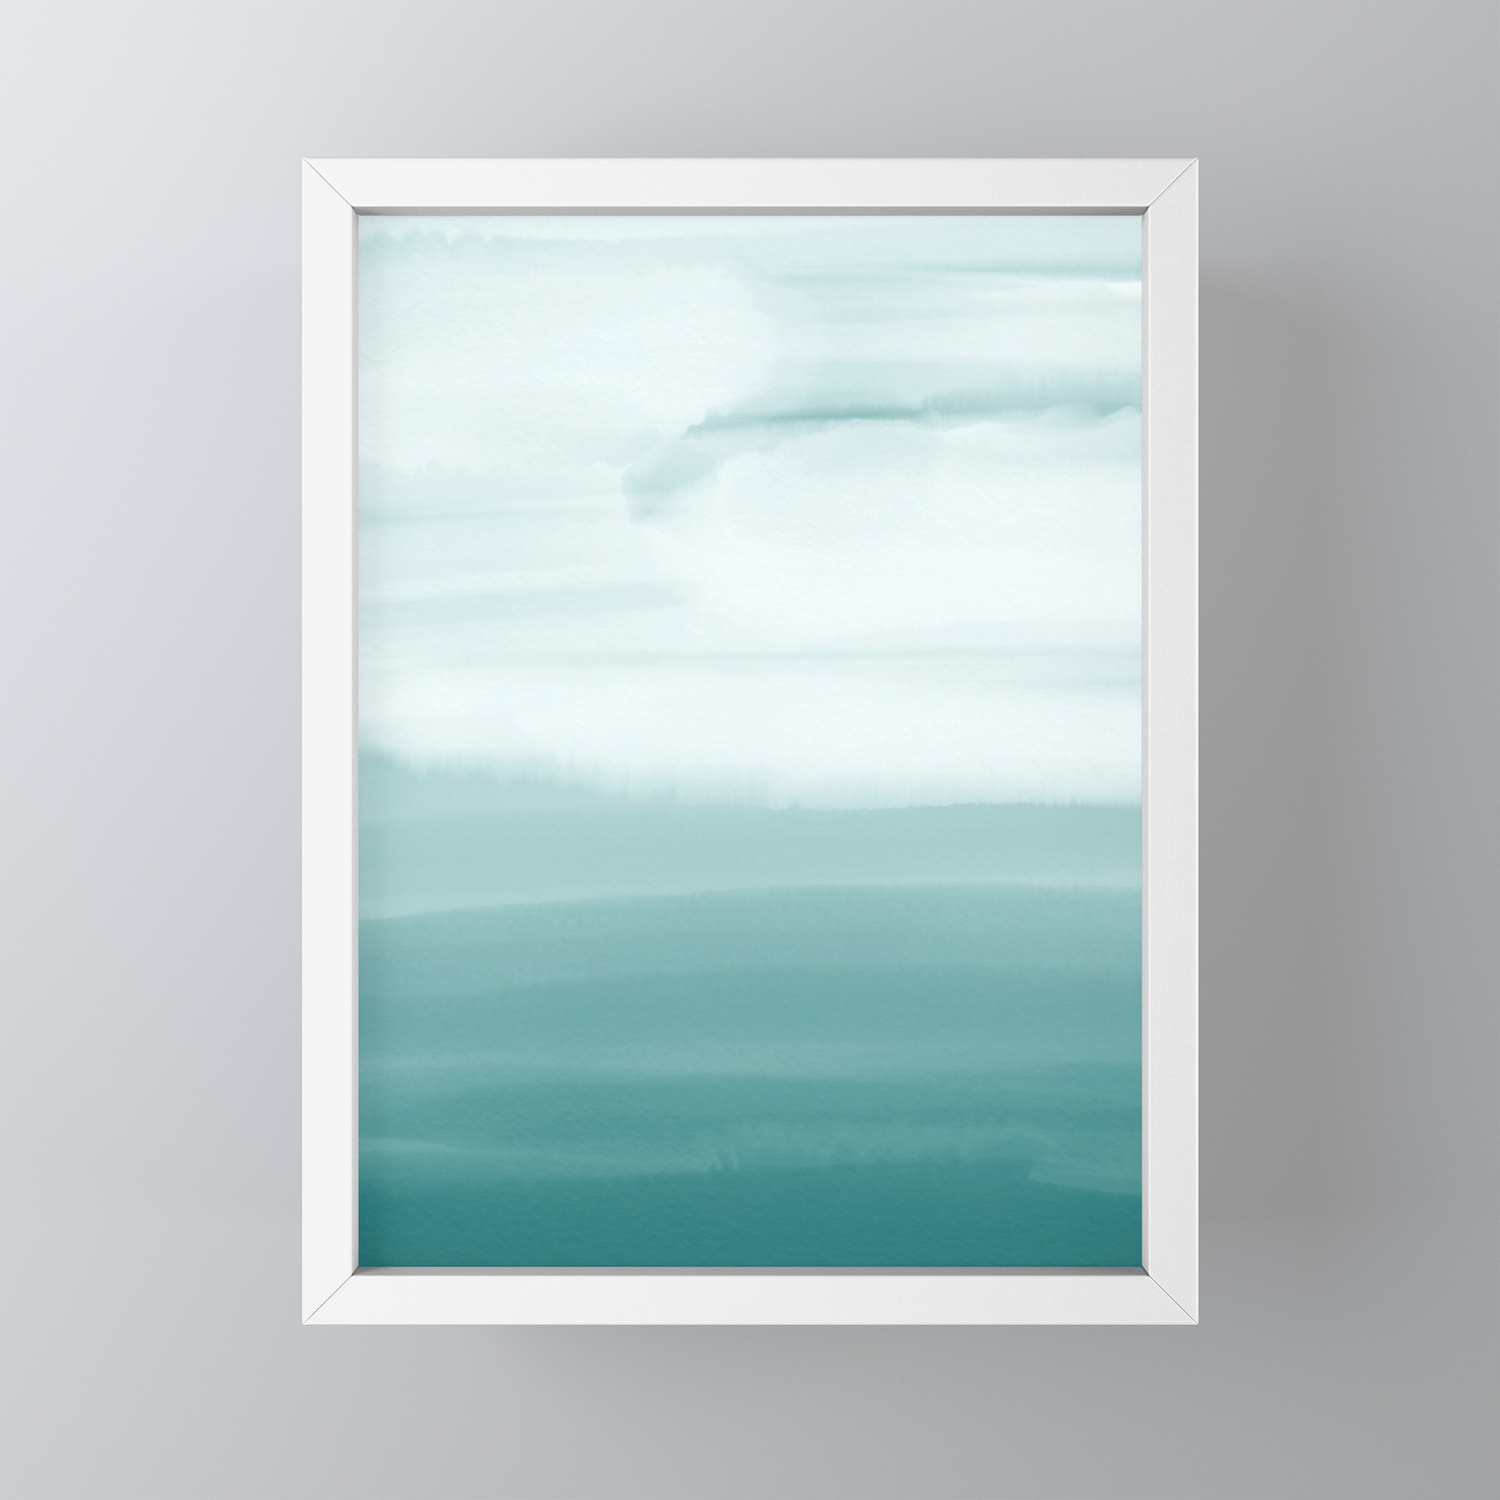 6x6 Original Abstract Ocean Small Minimalist Painting Waves Art Square Soft Muted Yellow Green Blues Water Beach Sky Horizon Unframed Square